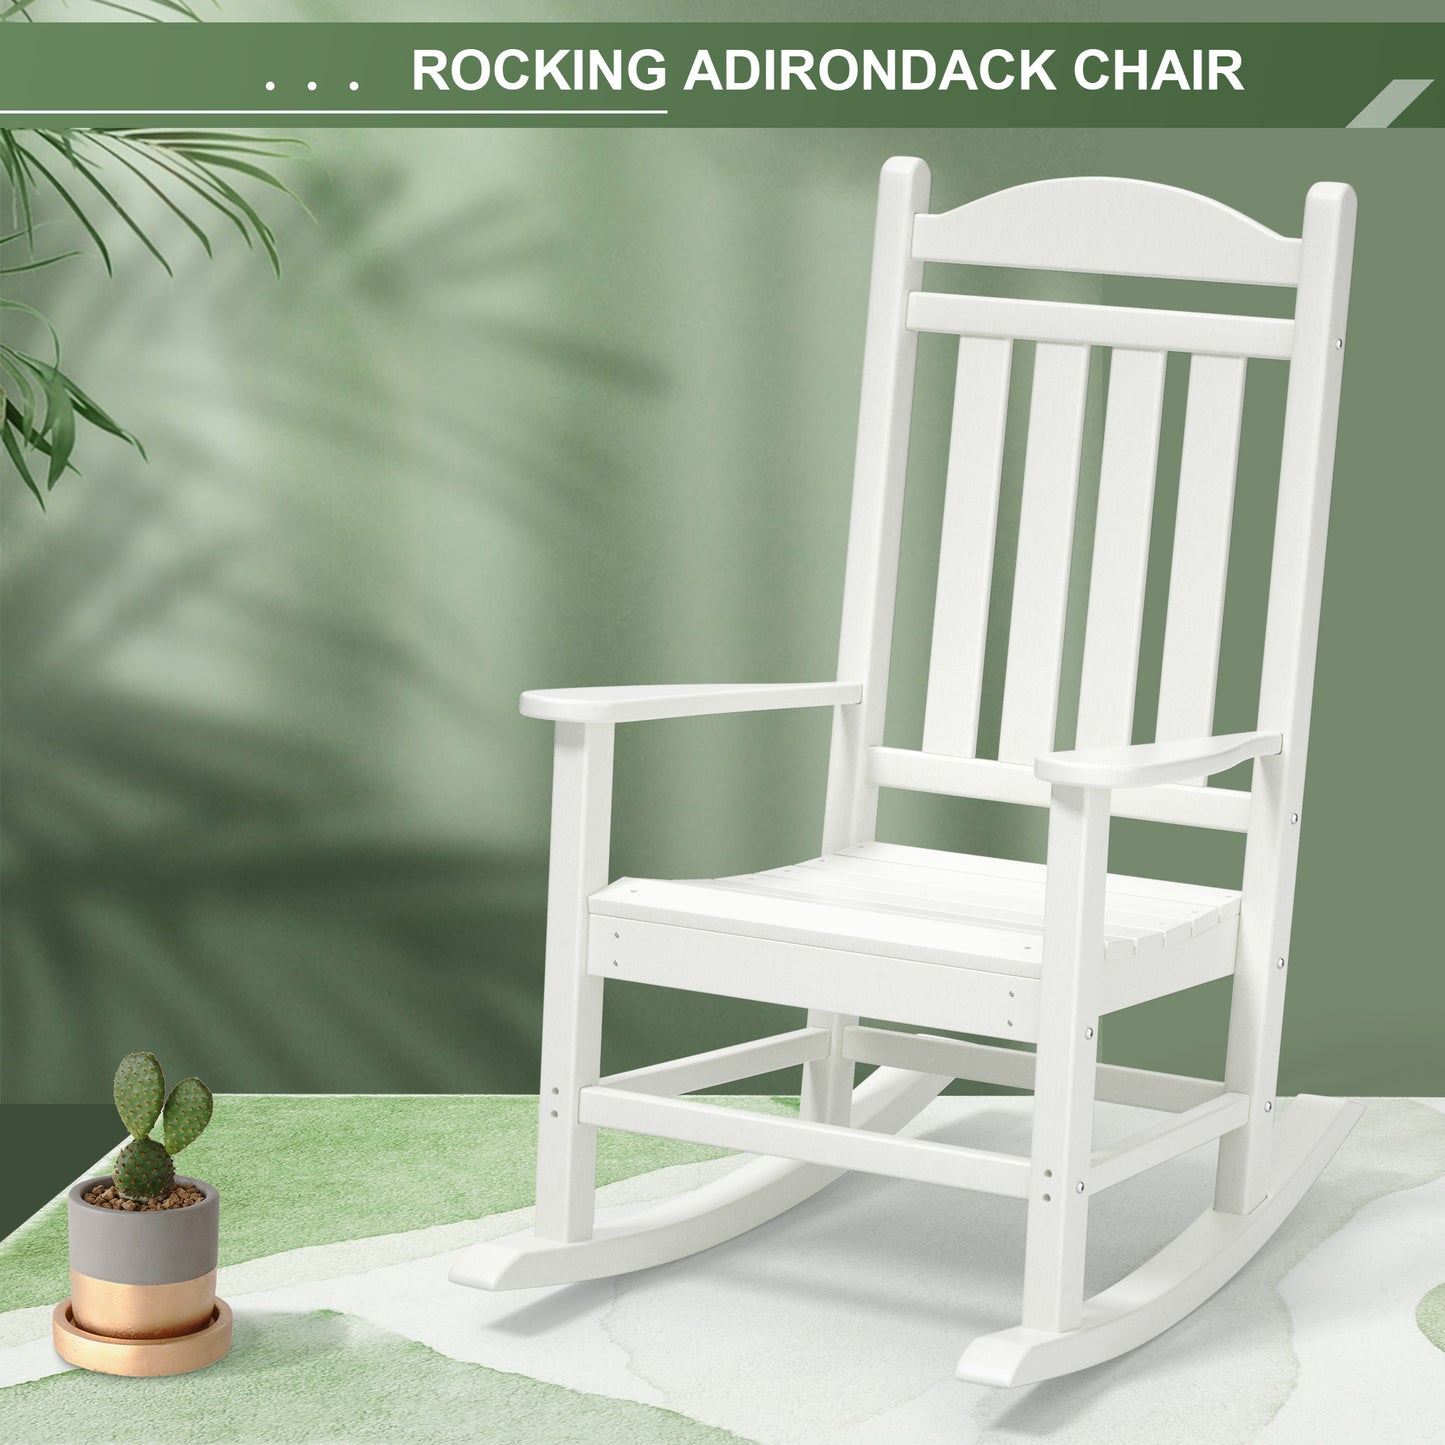 Outdoor Rocking Chairs All-Weather Resistant HDPE Poly Wood Resin Plastic, Humidity-Proof, Porch, Deck, Garden, Lawn, Backyard, Fire Pit, Garden Glider, Patio Rocker With High Backrest